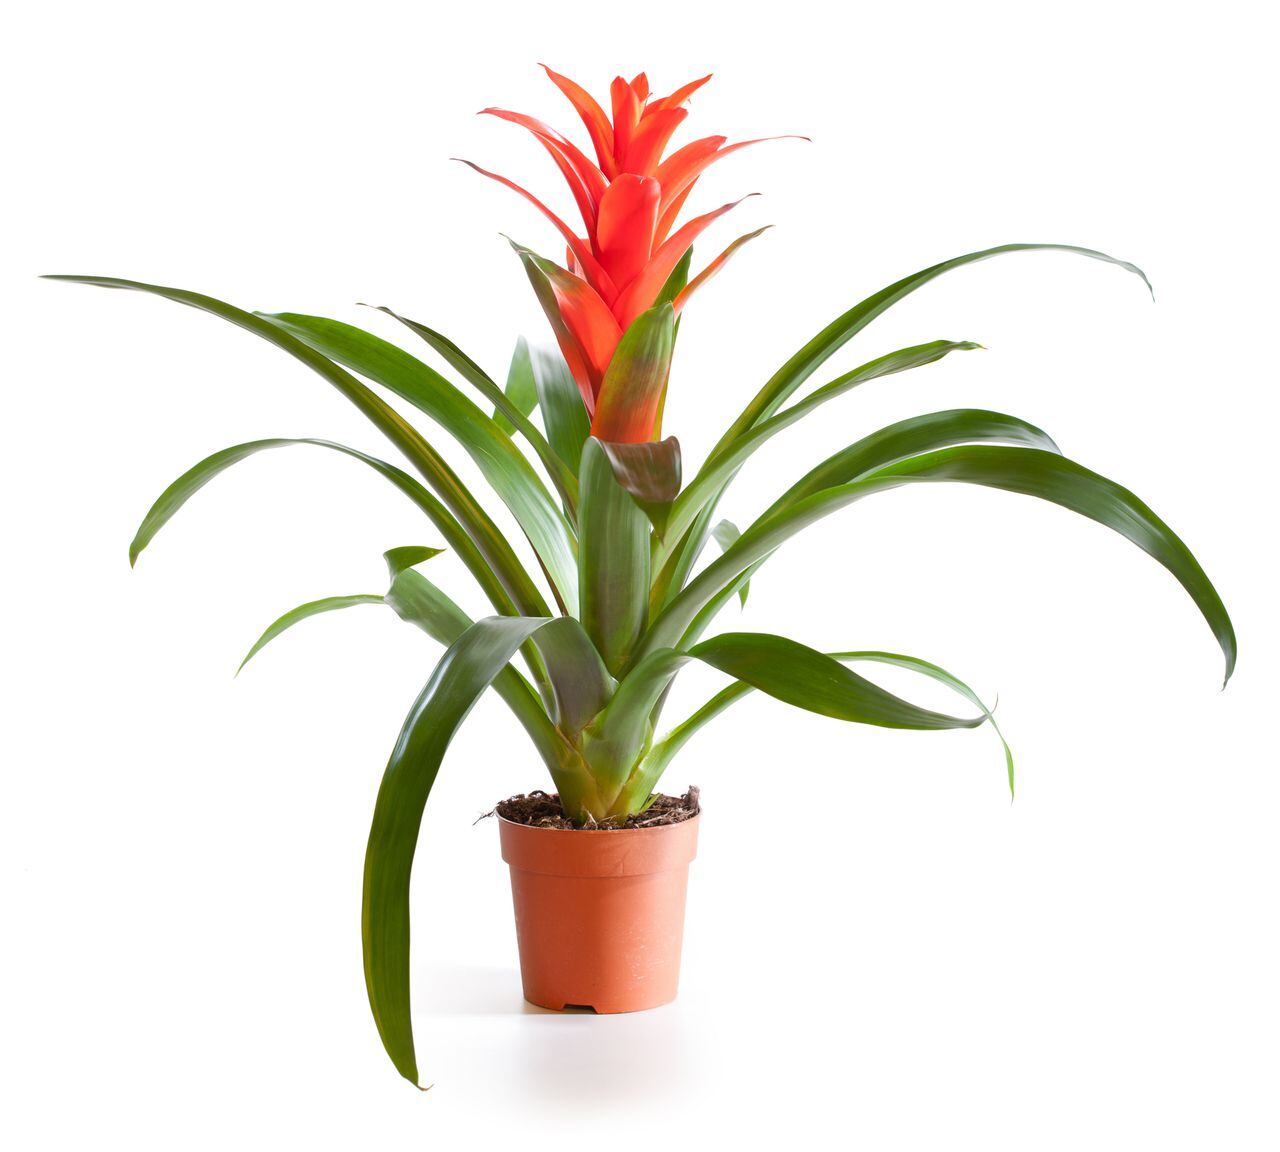 Blossoming plant of guzmania in flowerpot isolated on white.